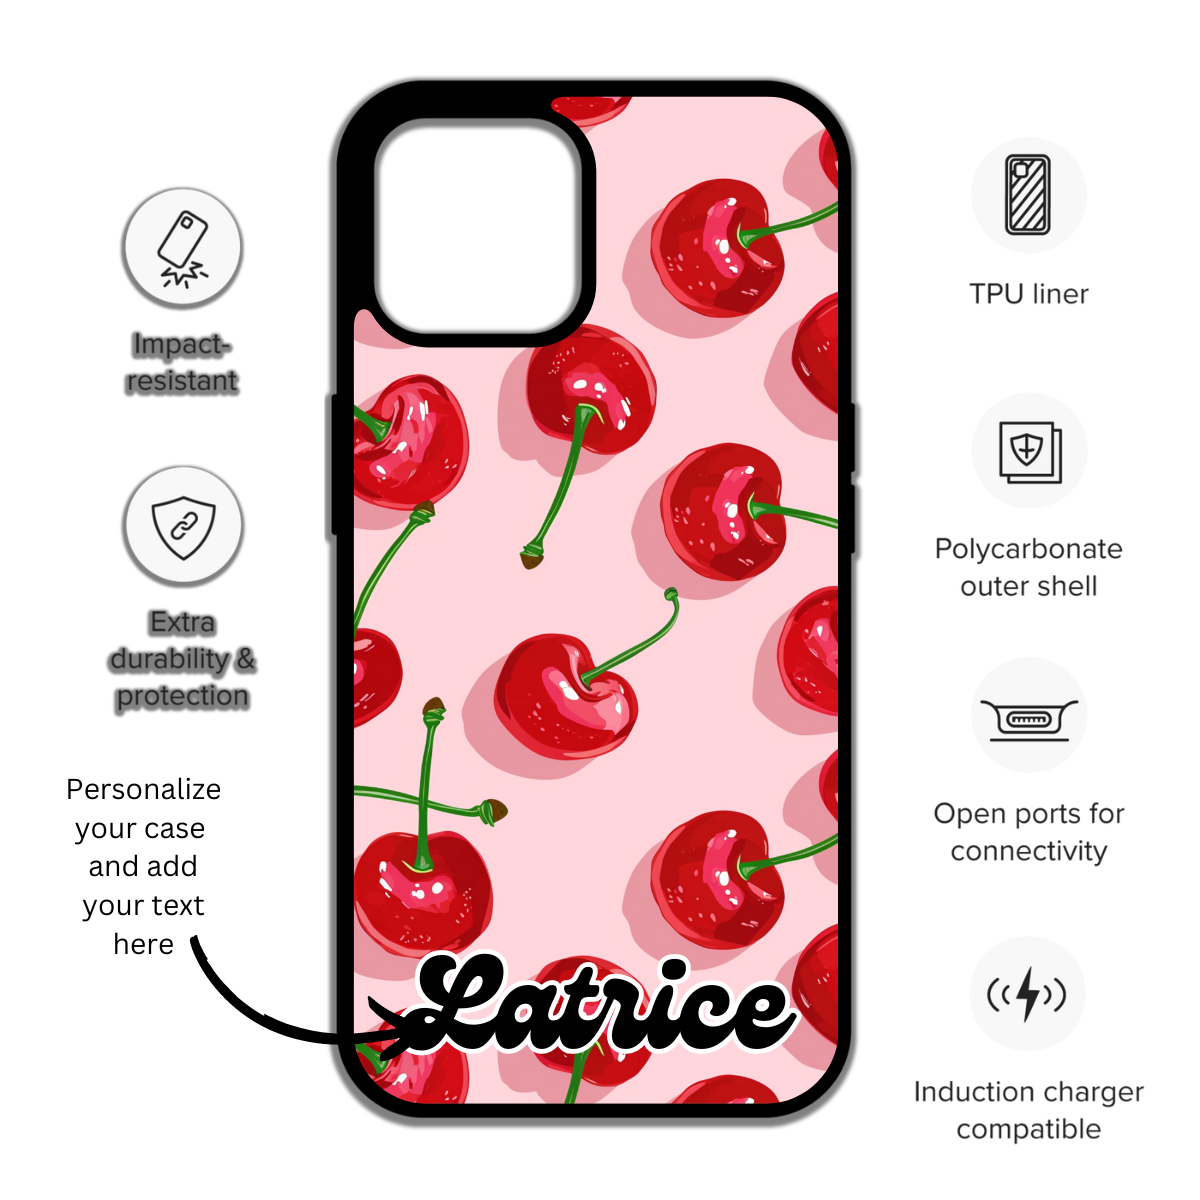 Personalized Phone Case – Custom Phone Case - pretty phone case - cute iphone case - cherry iphone case - personalized gift -birthday gift